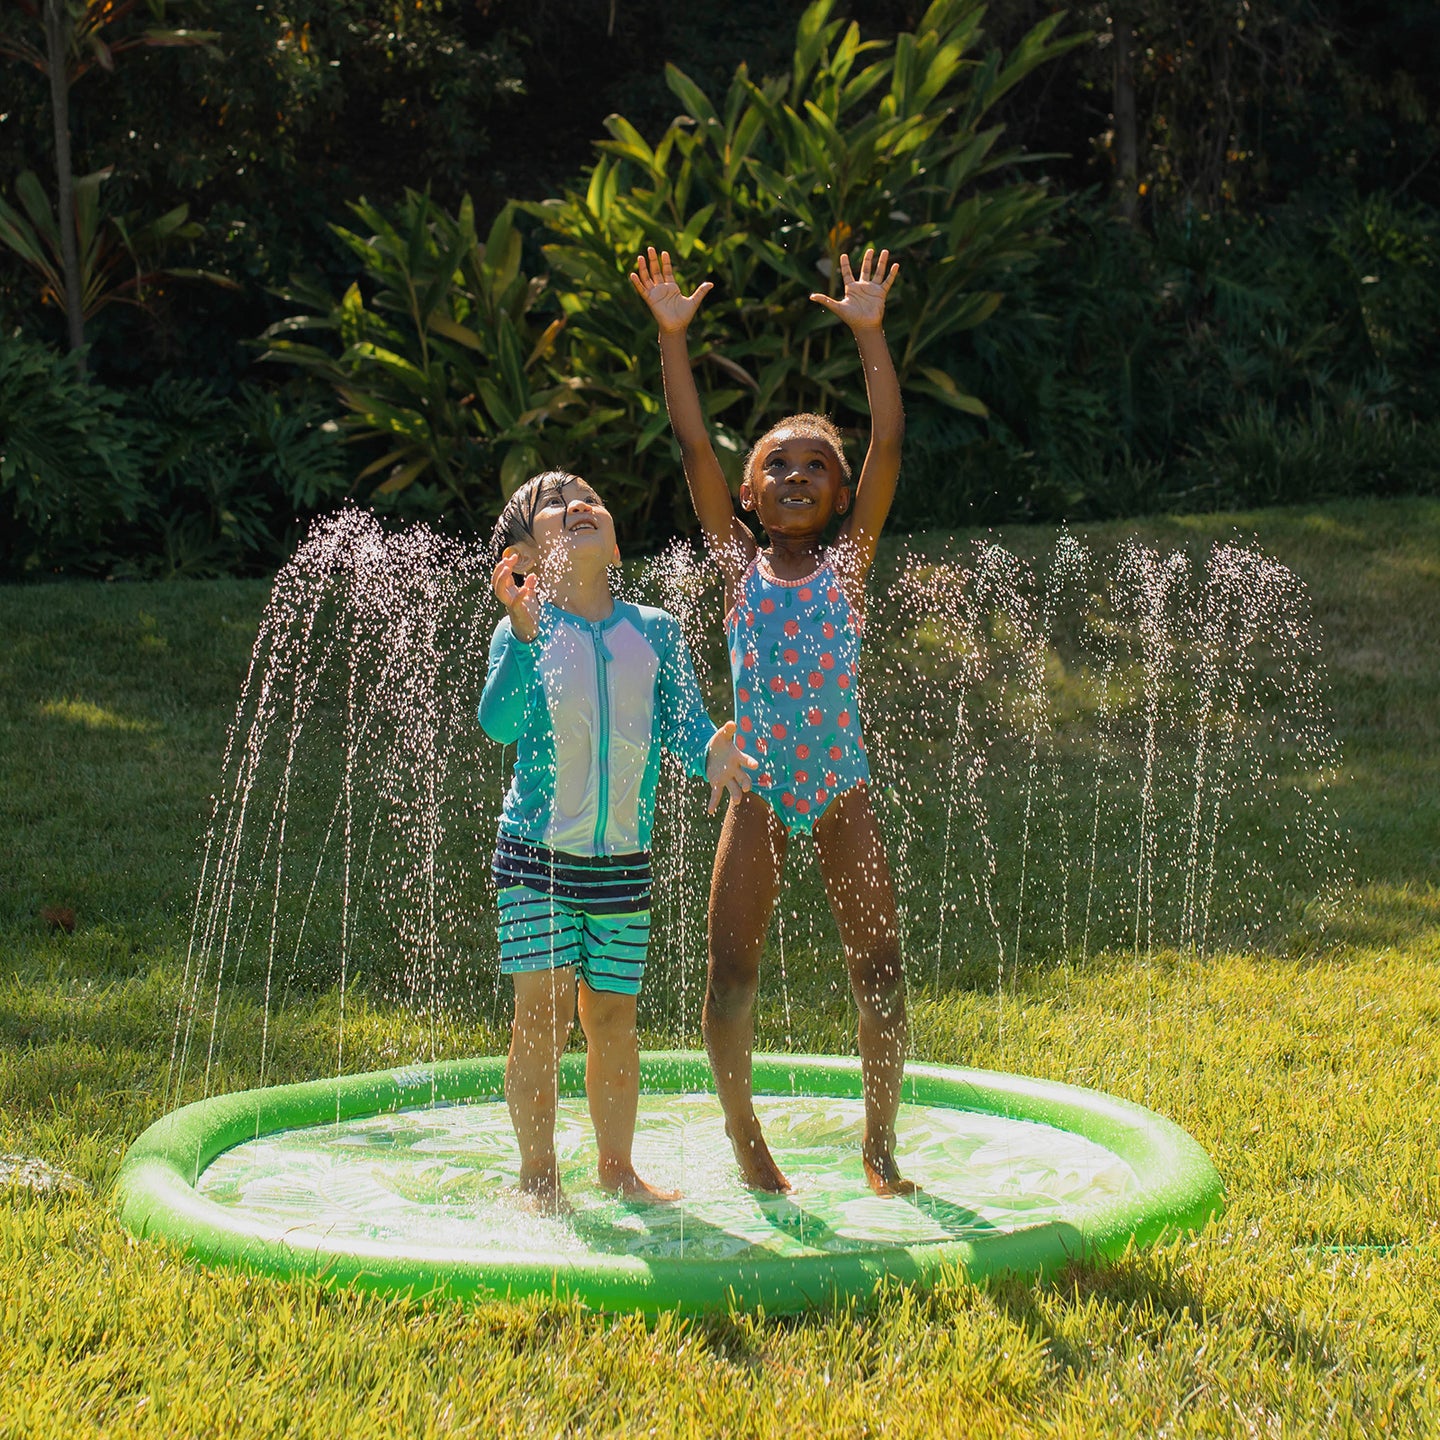 Tropical Splash Pad for kids by FUNBOY